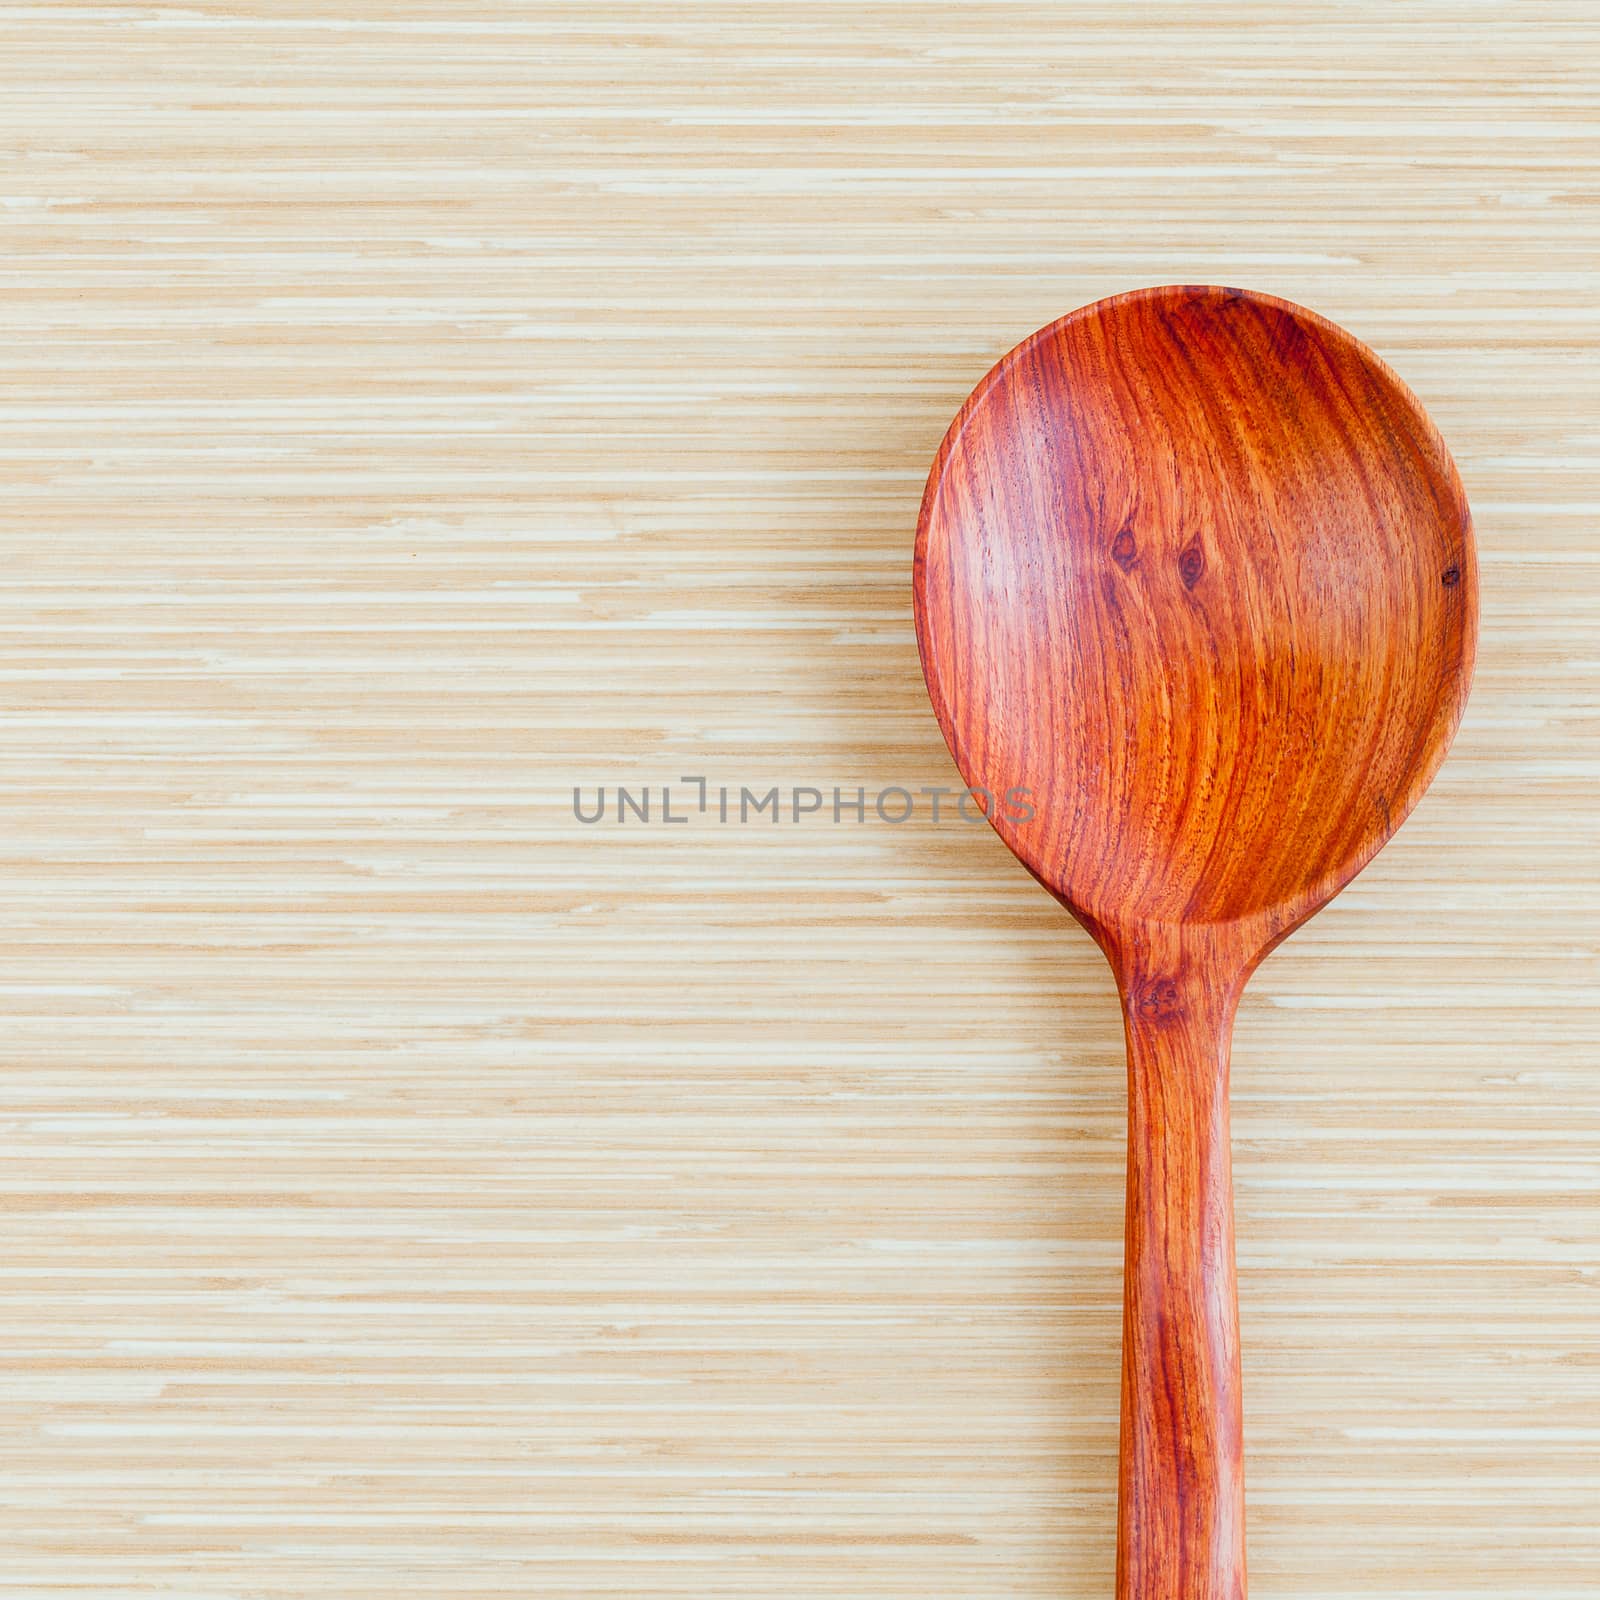 Wooden spoon on wooden background - concept for food and kitchen with copy space.